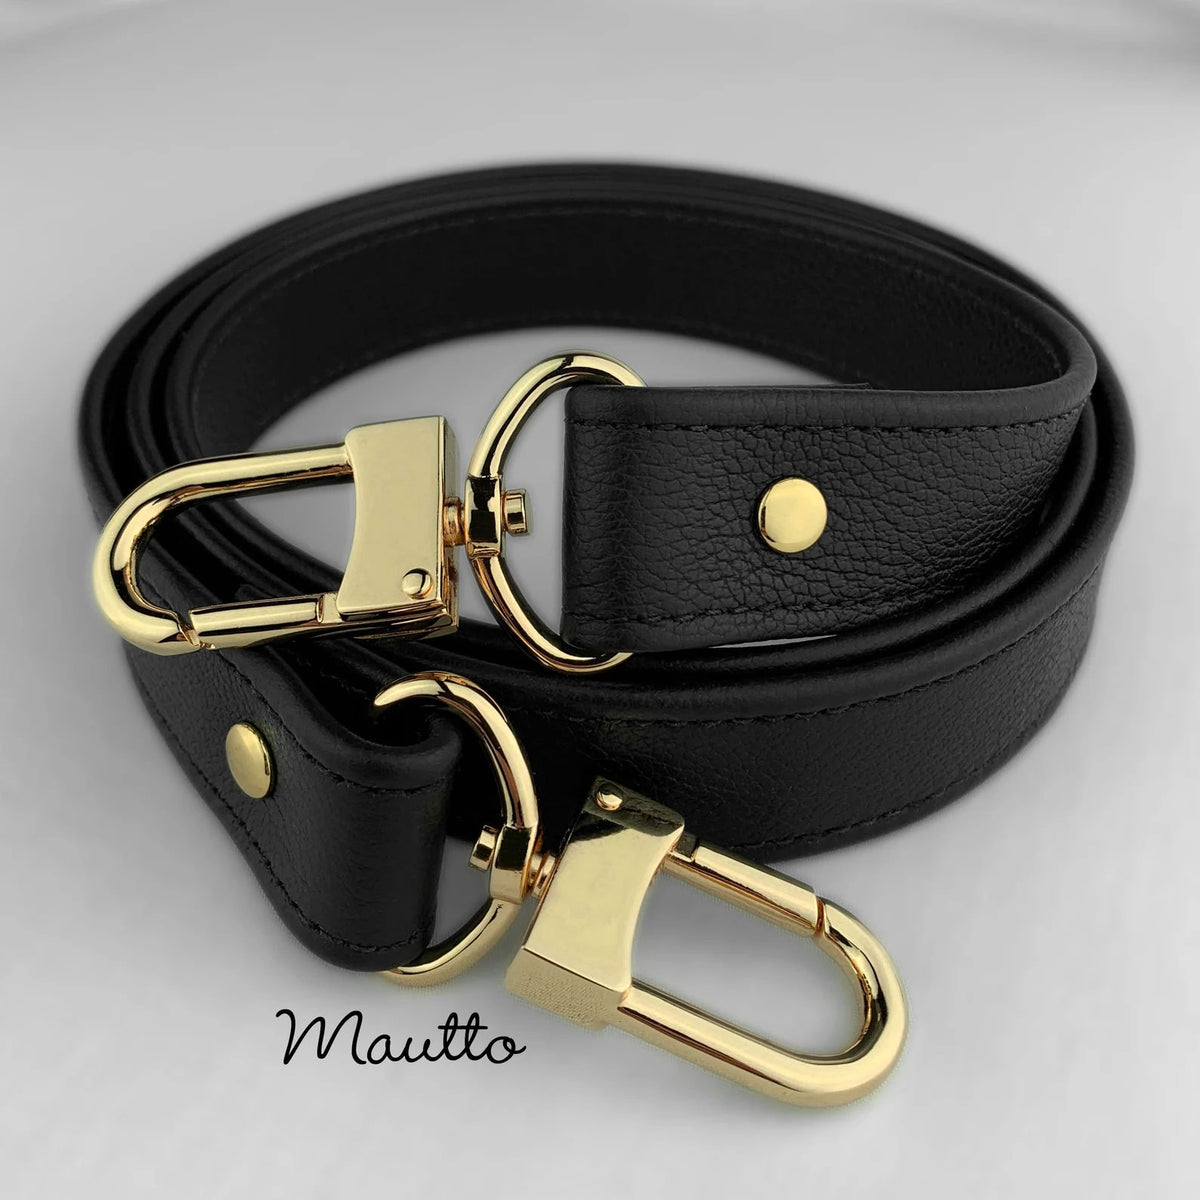 Dark Brown & Gold Strap for Bags - 1.5 Wide Nylon - Adjustable Length - U  Shape Style #16XLG Hooks, Mautto Handbags